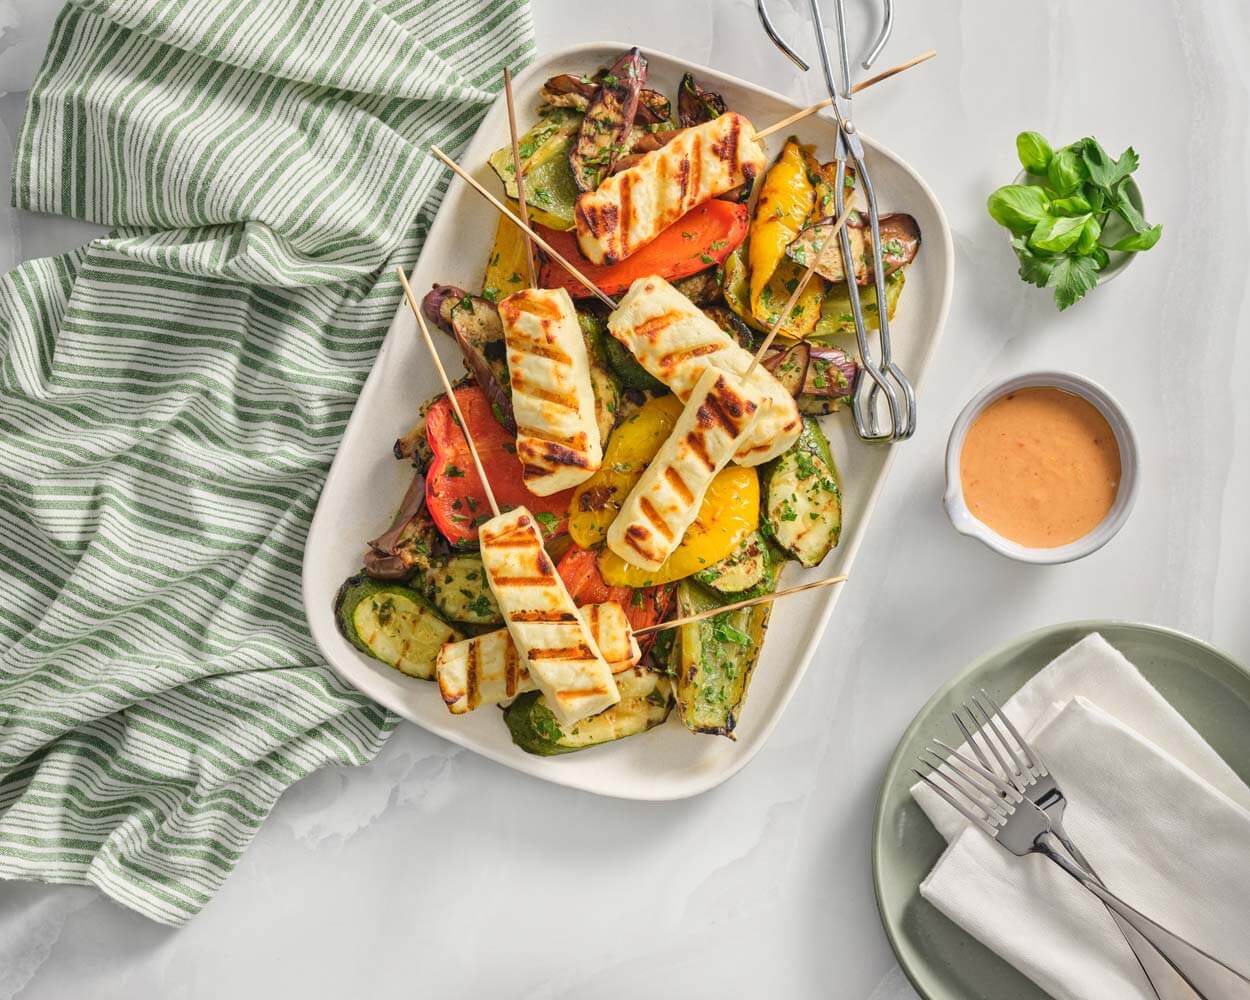 dish of salad on top of a green striped towel with grilled halloumi on skewers on a bed of vegetables